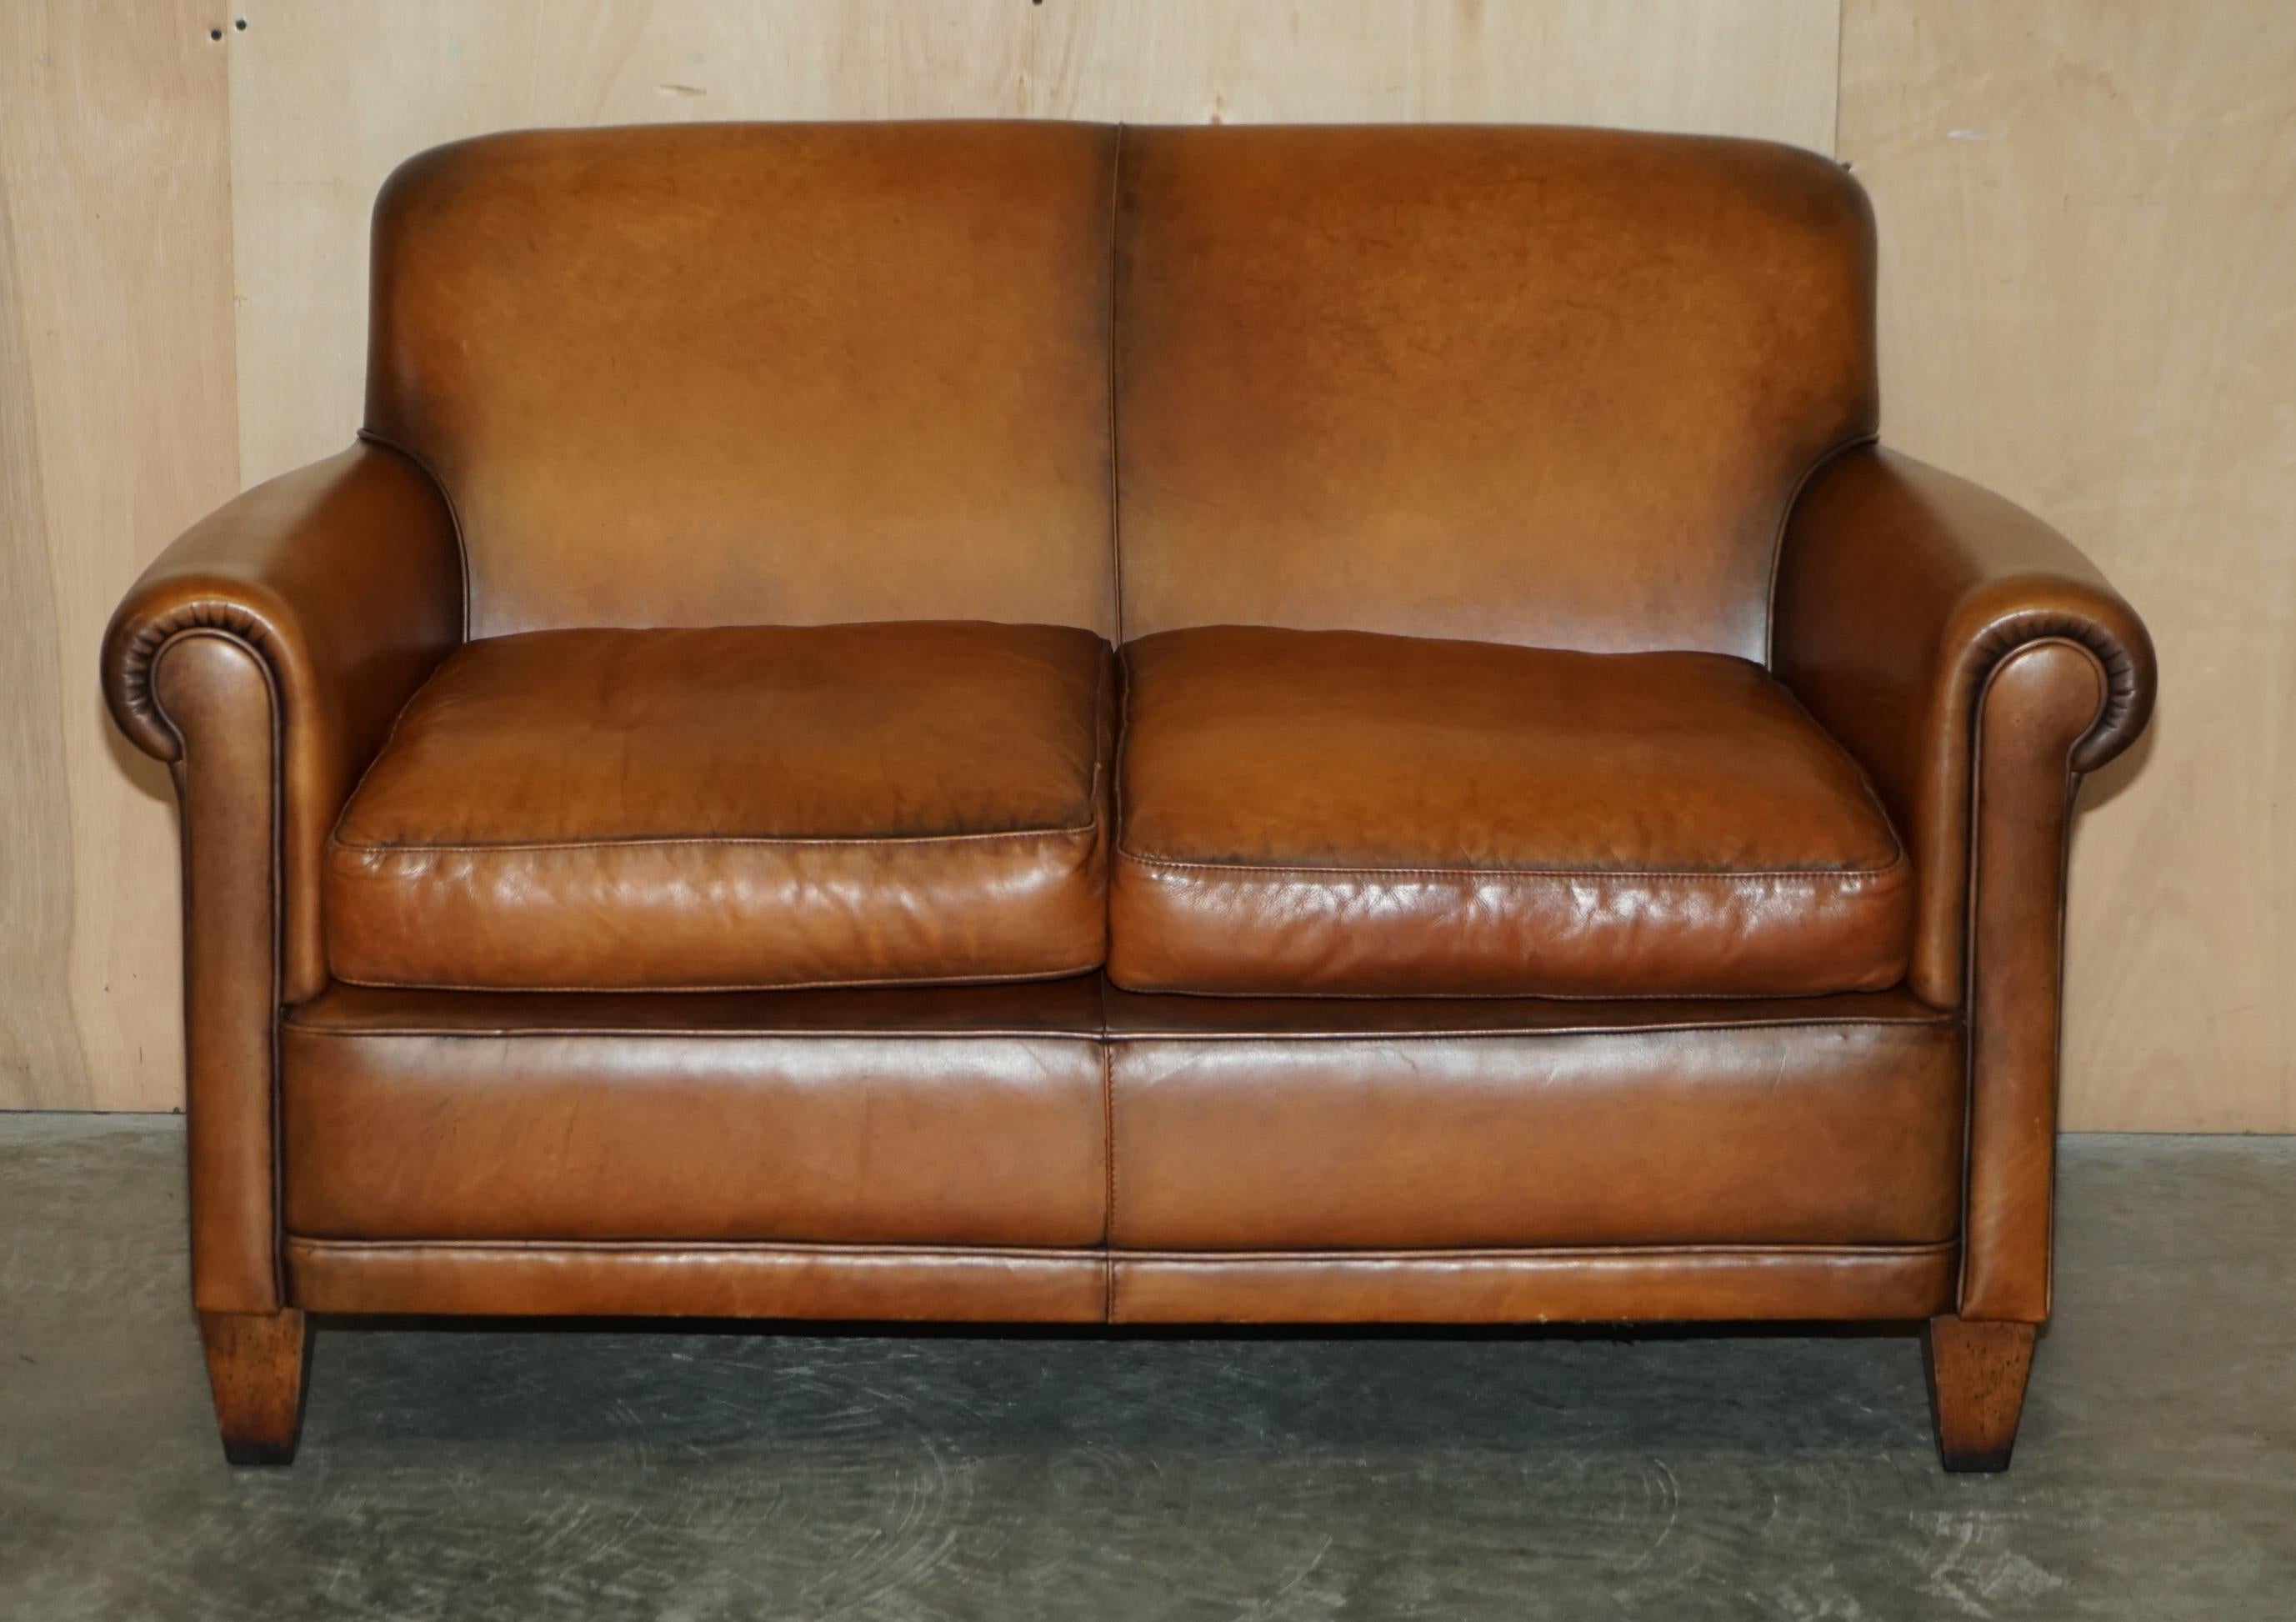 We are delighted to offer for sale this lovely Laura Ashley Burlington brown leather two seat sofa with original label under the seat

The sofa is very comfortable, a perfect size and a lovely colour which is heritage brown, it has fibre filled